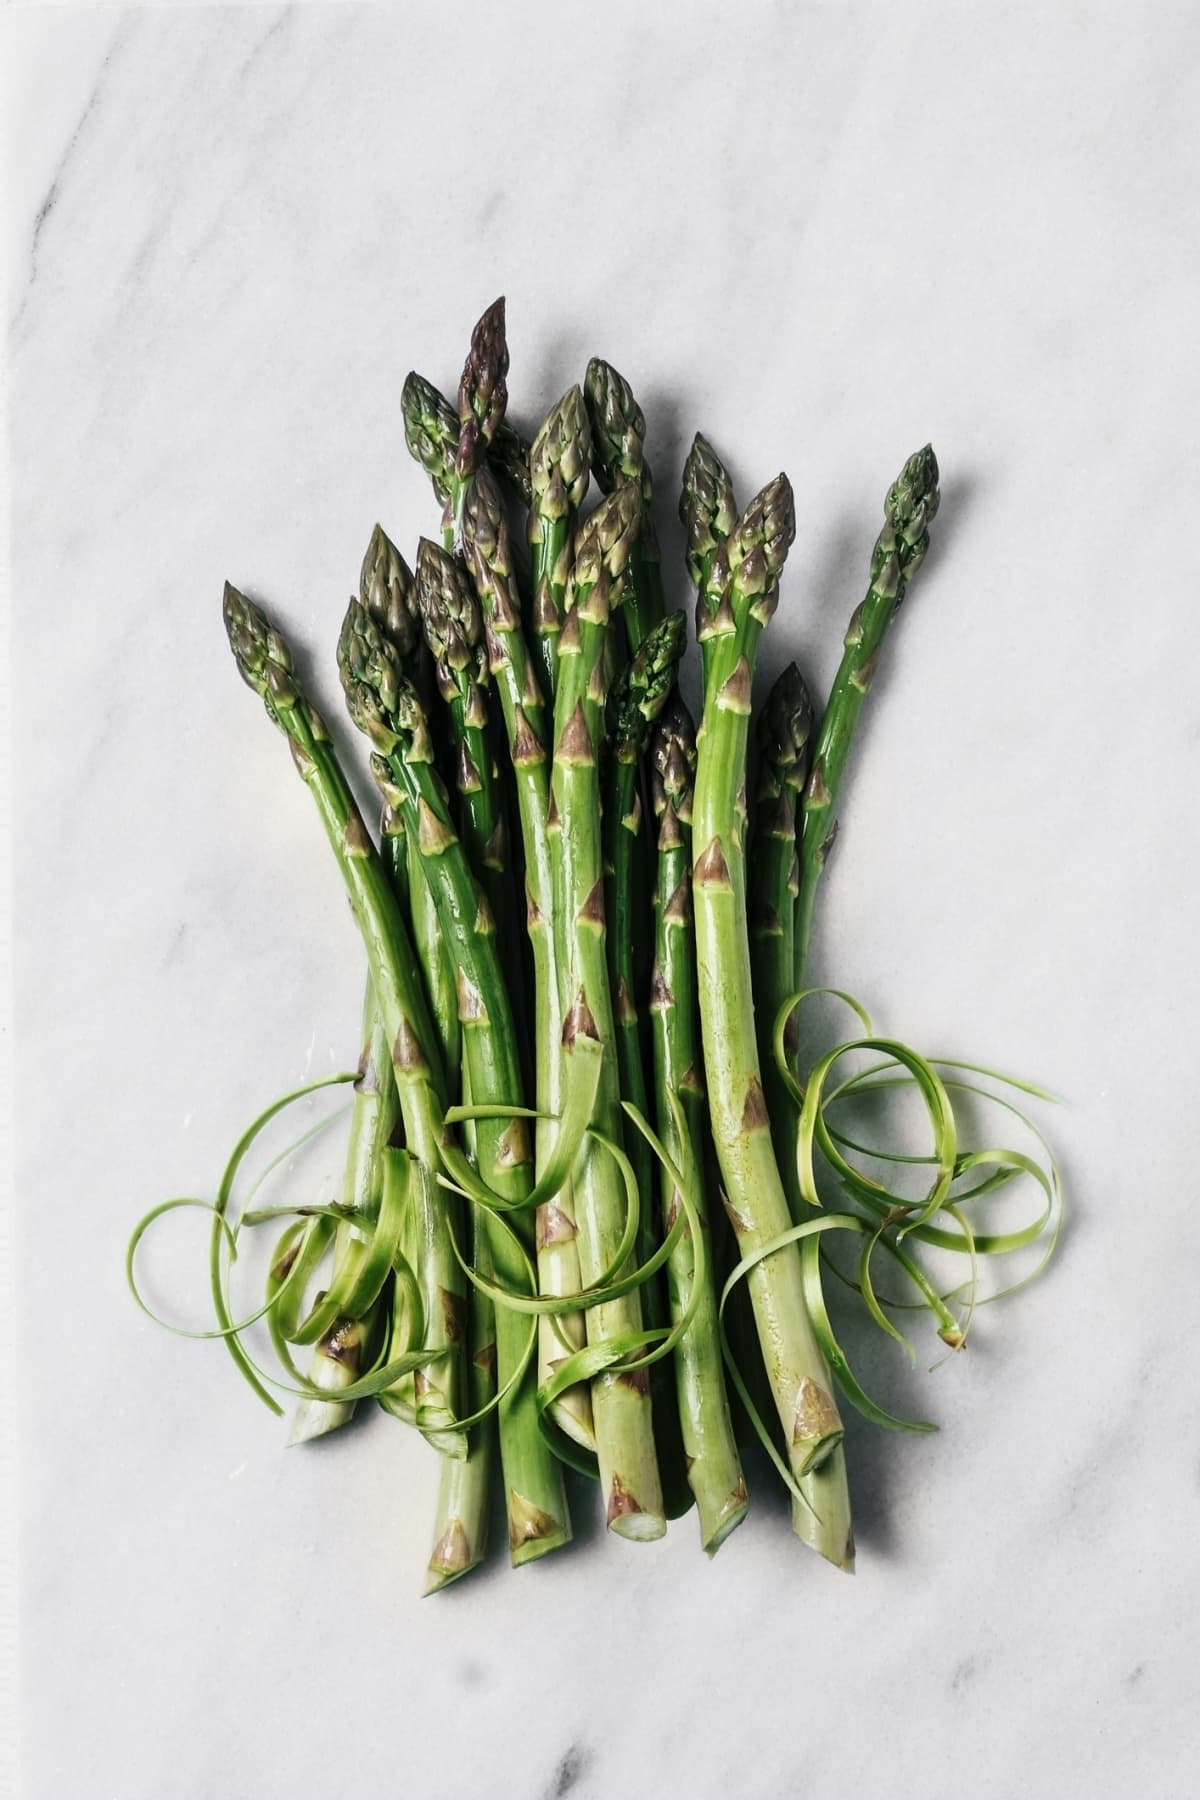 A bunch of fresh asparagus on white background